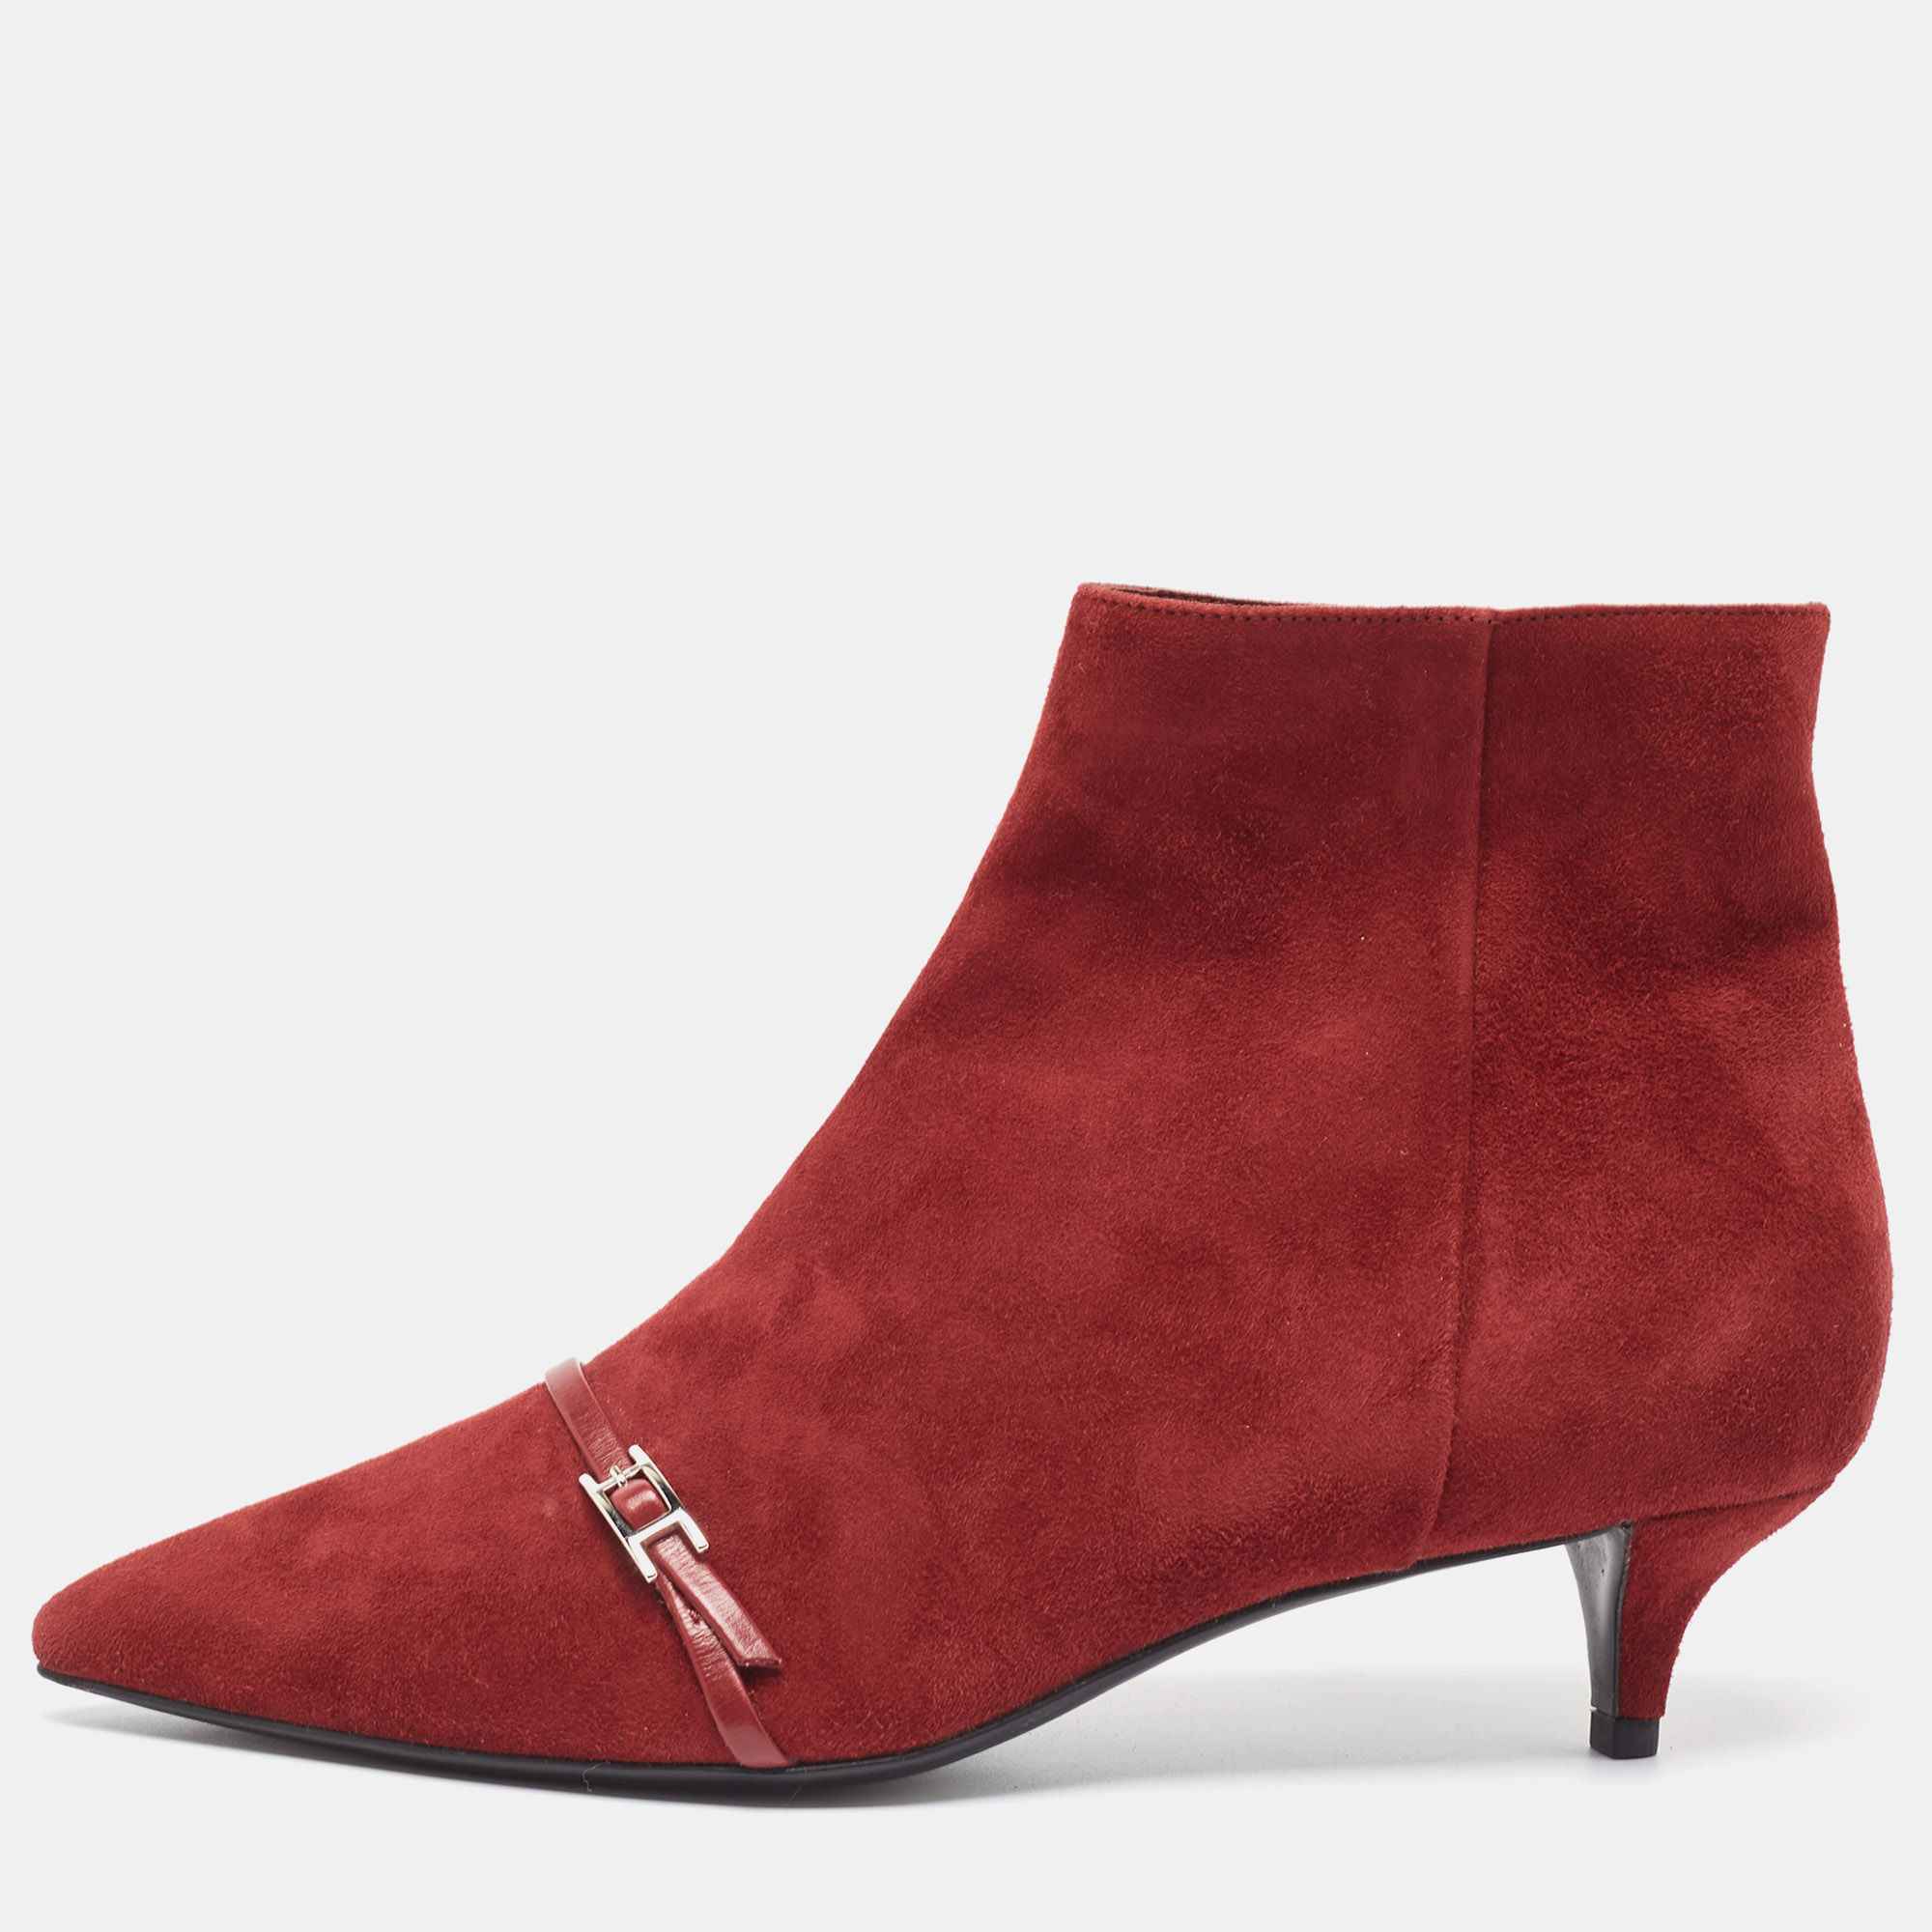 Hermes herm&egrave;s dark red suede ankle booties size 38